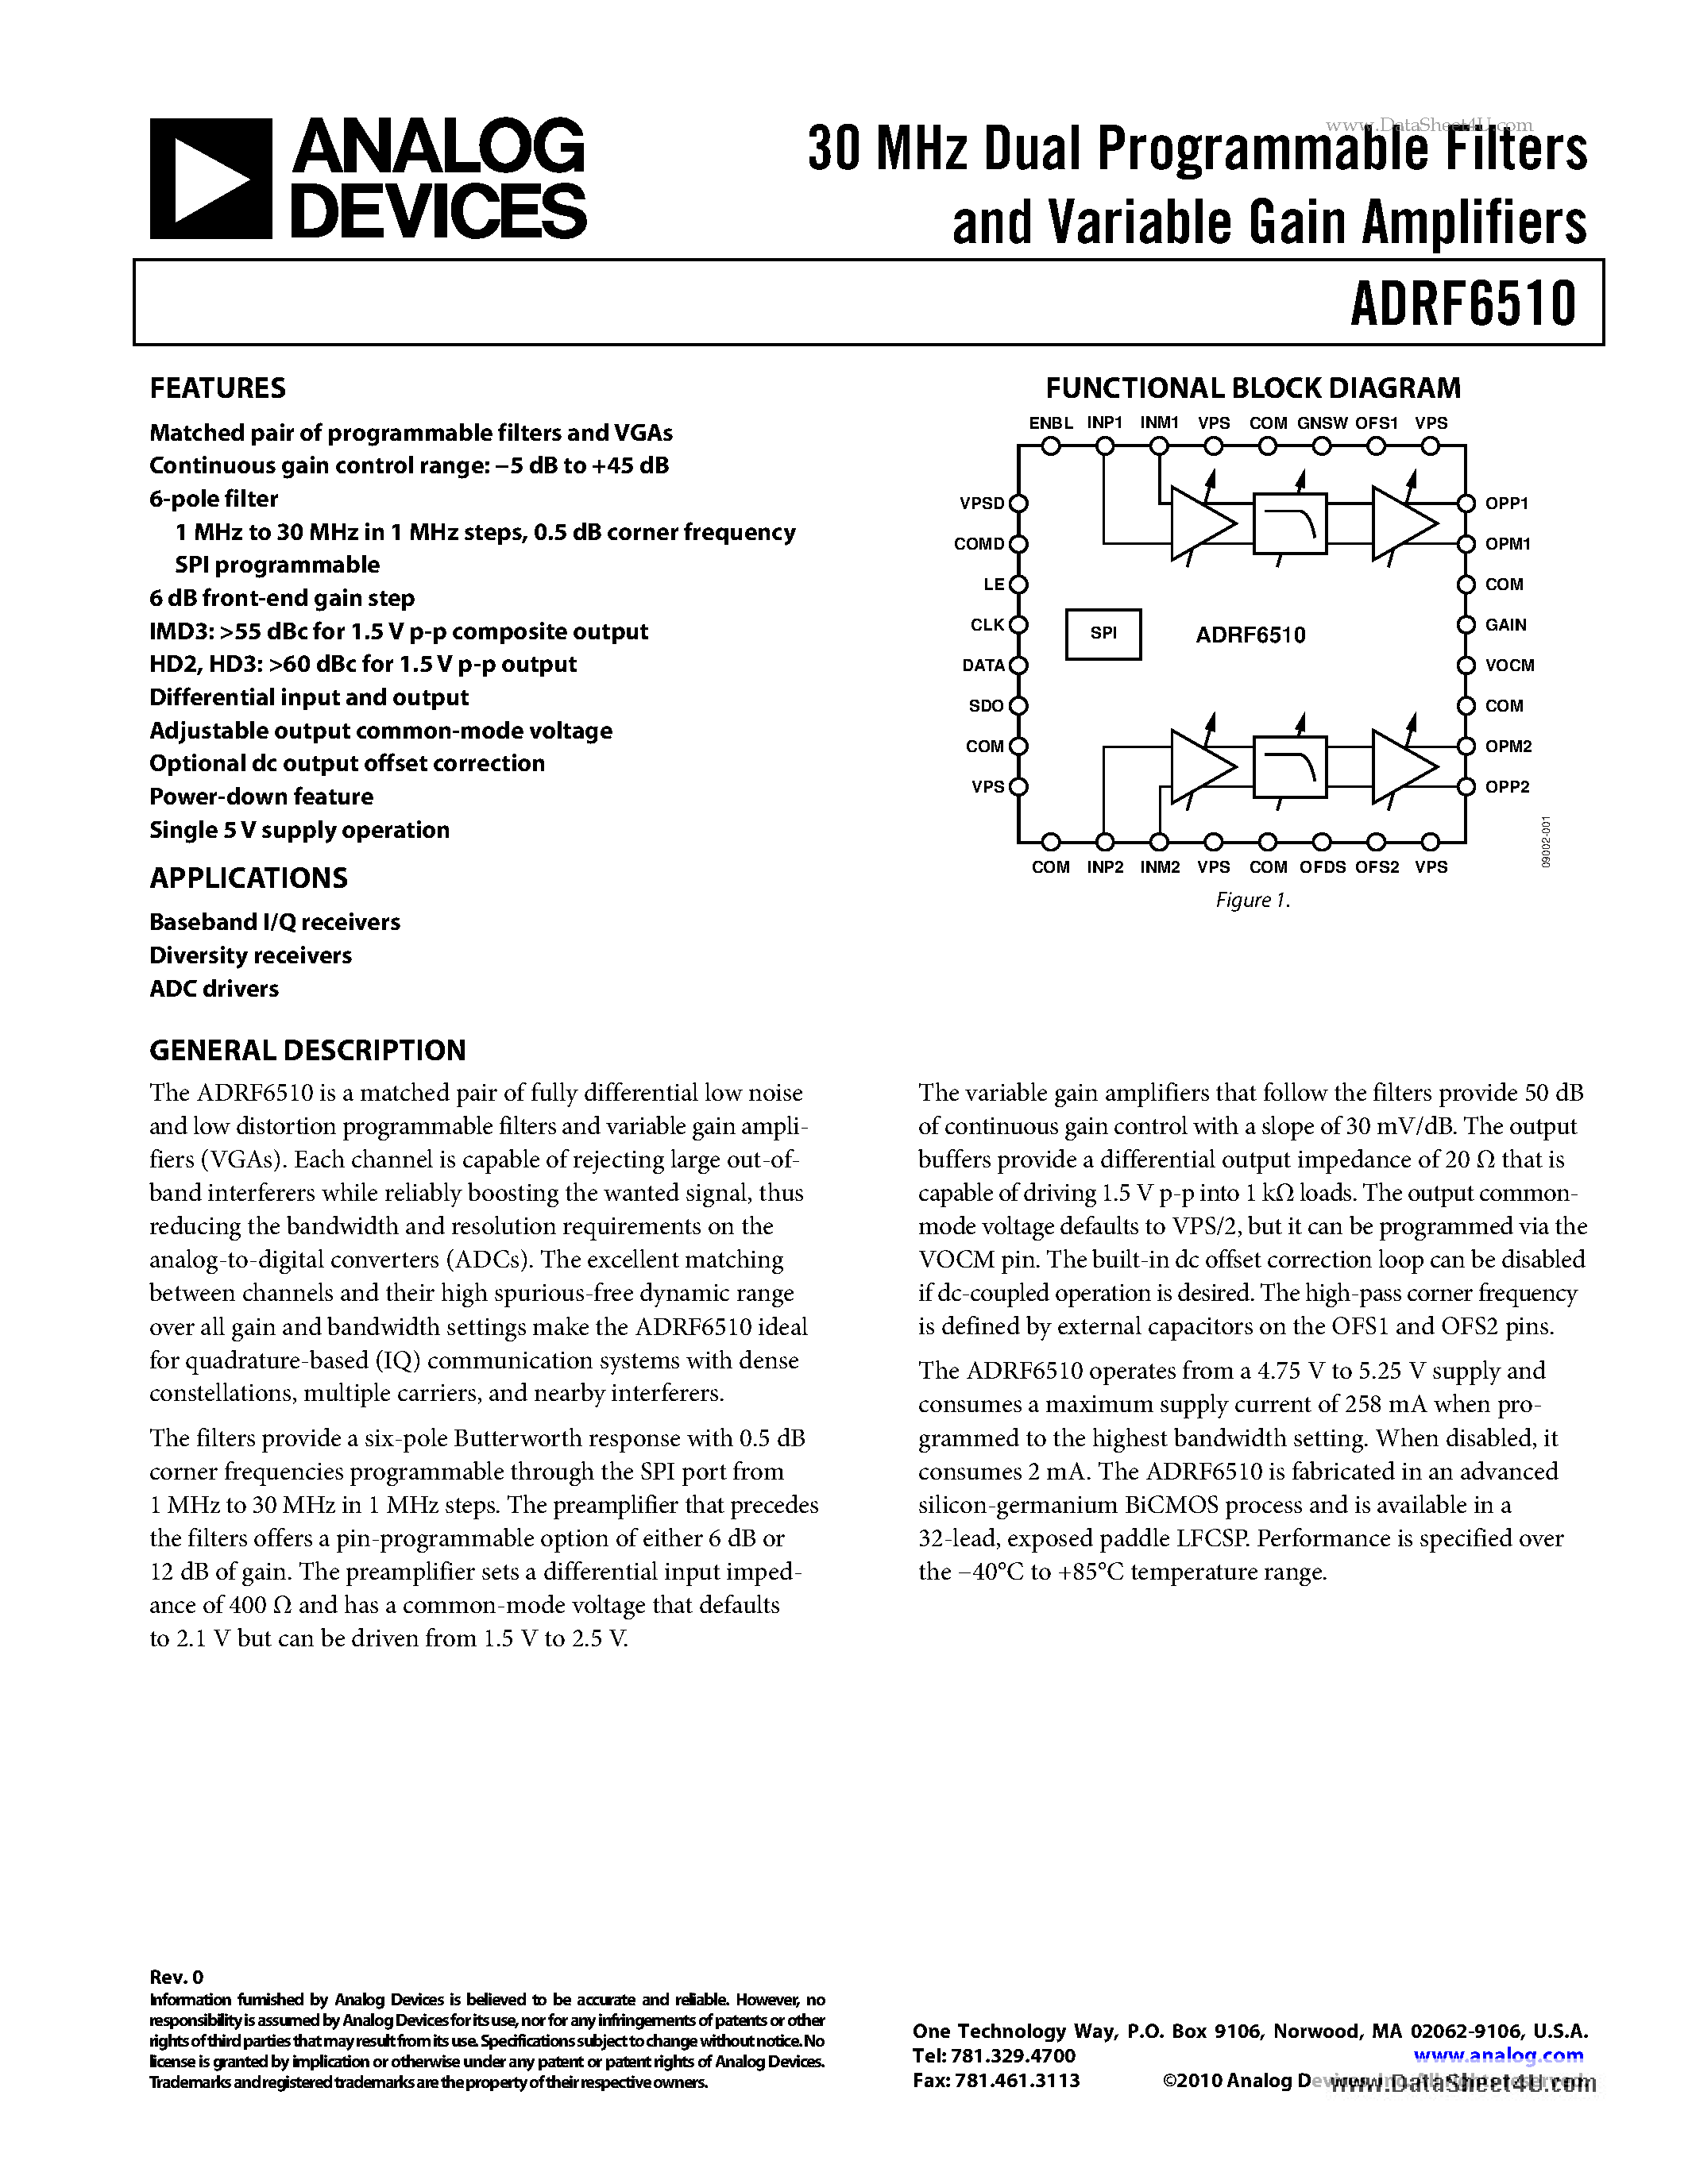 Datasheet ADRF6510 - 30 MHz Dual Programmable Filters and Variable Gain Amplifiers page 1